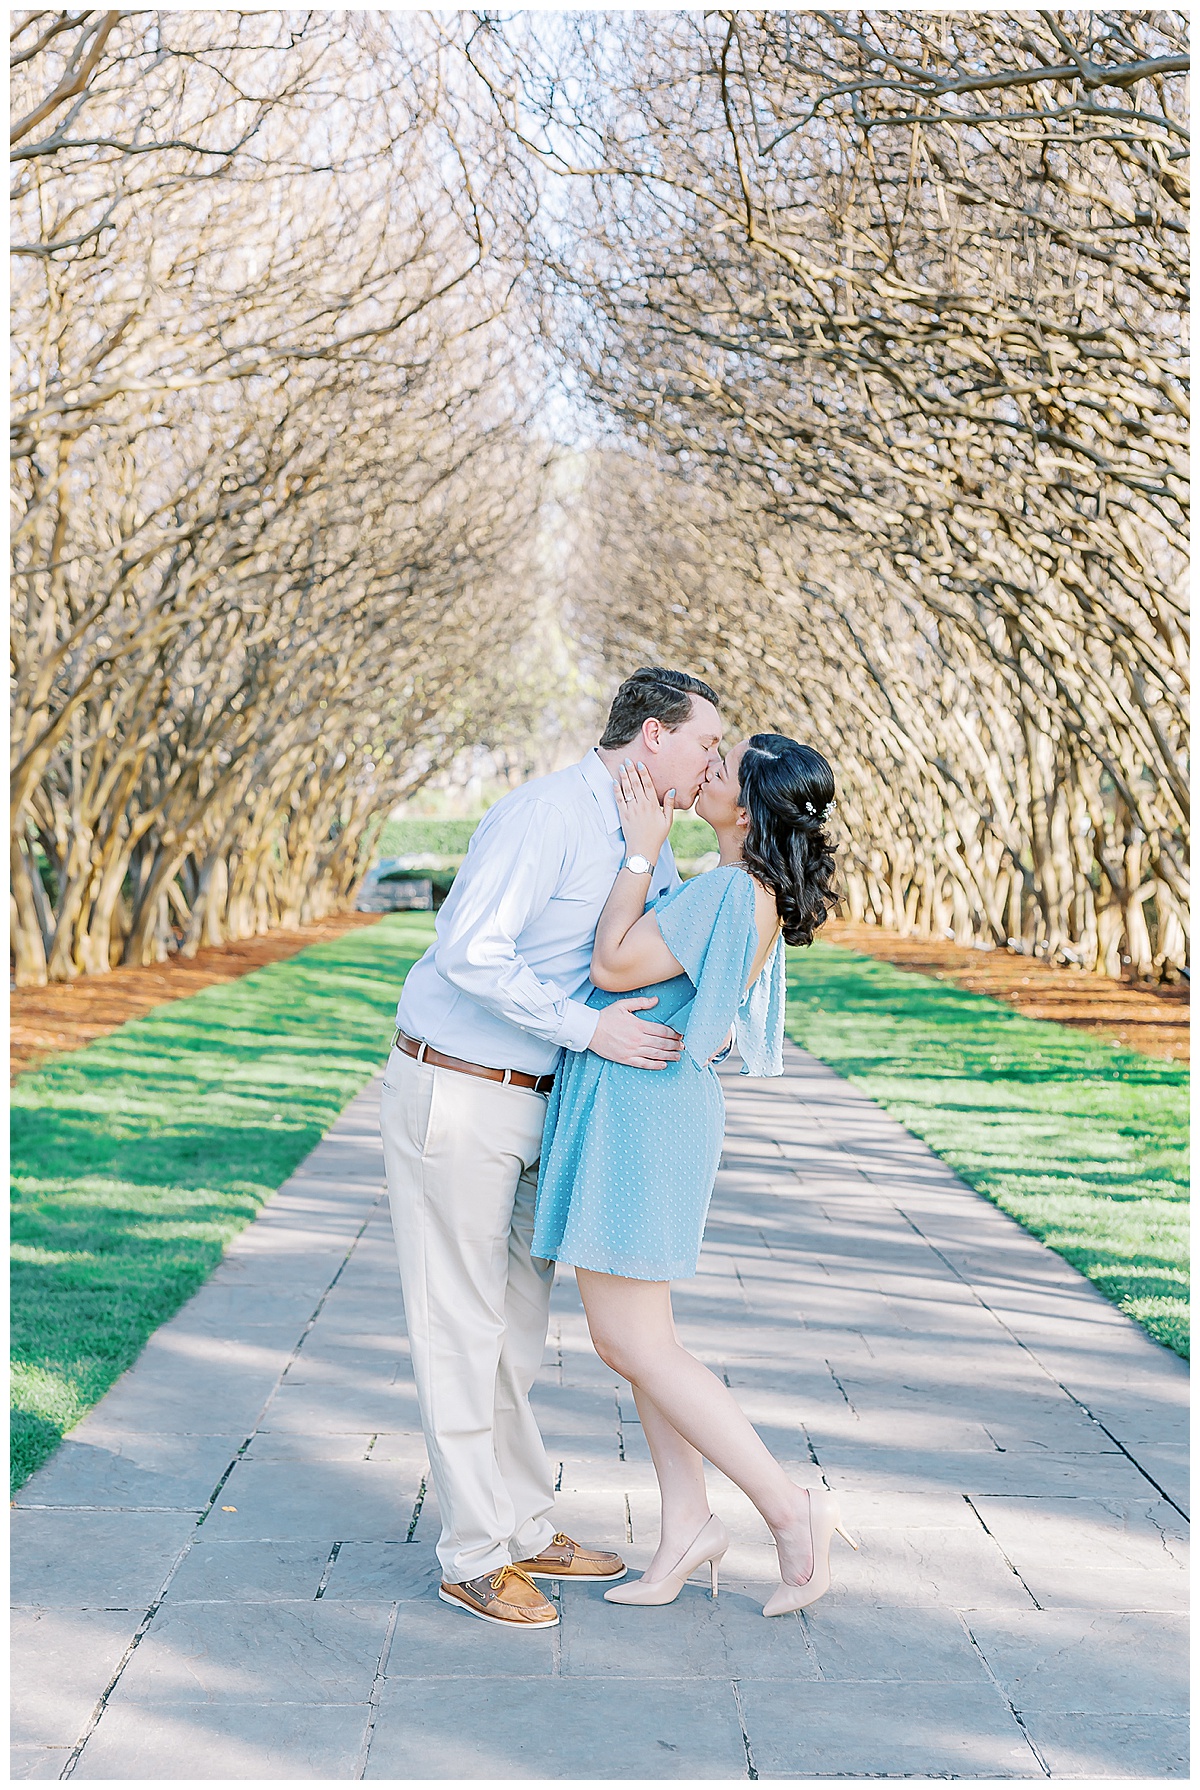 dallas engagement session, dallas engagement photographer, dallas wedding photographer, the cinnamon barn, dallas arboretum engagement, dallas arboretum engagement session, dallas engagement session, brides of north texas